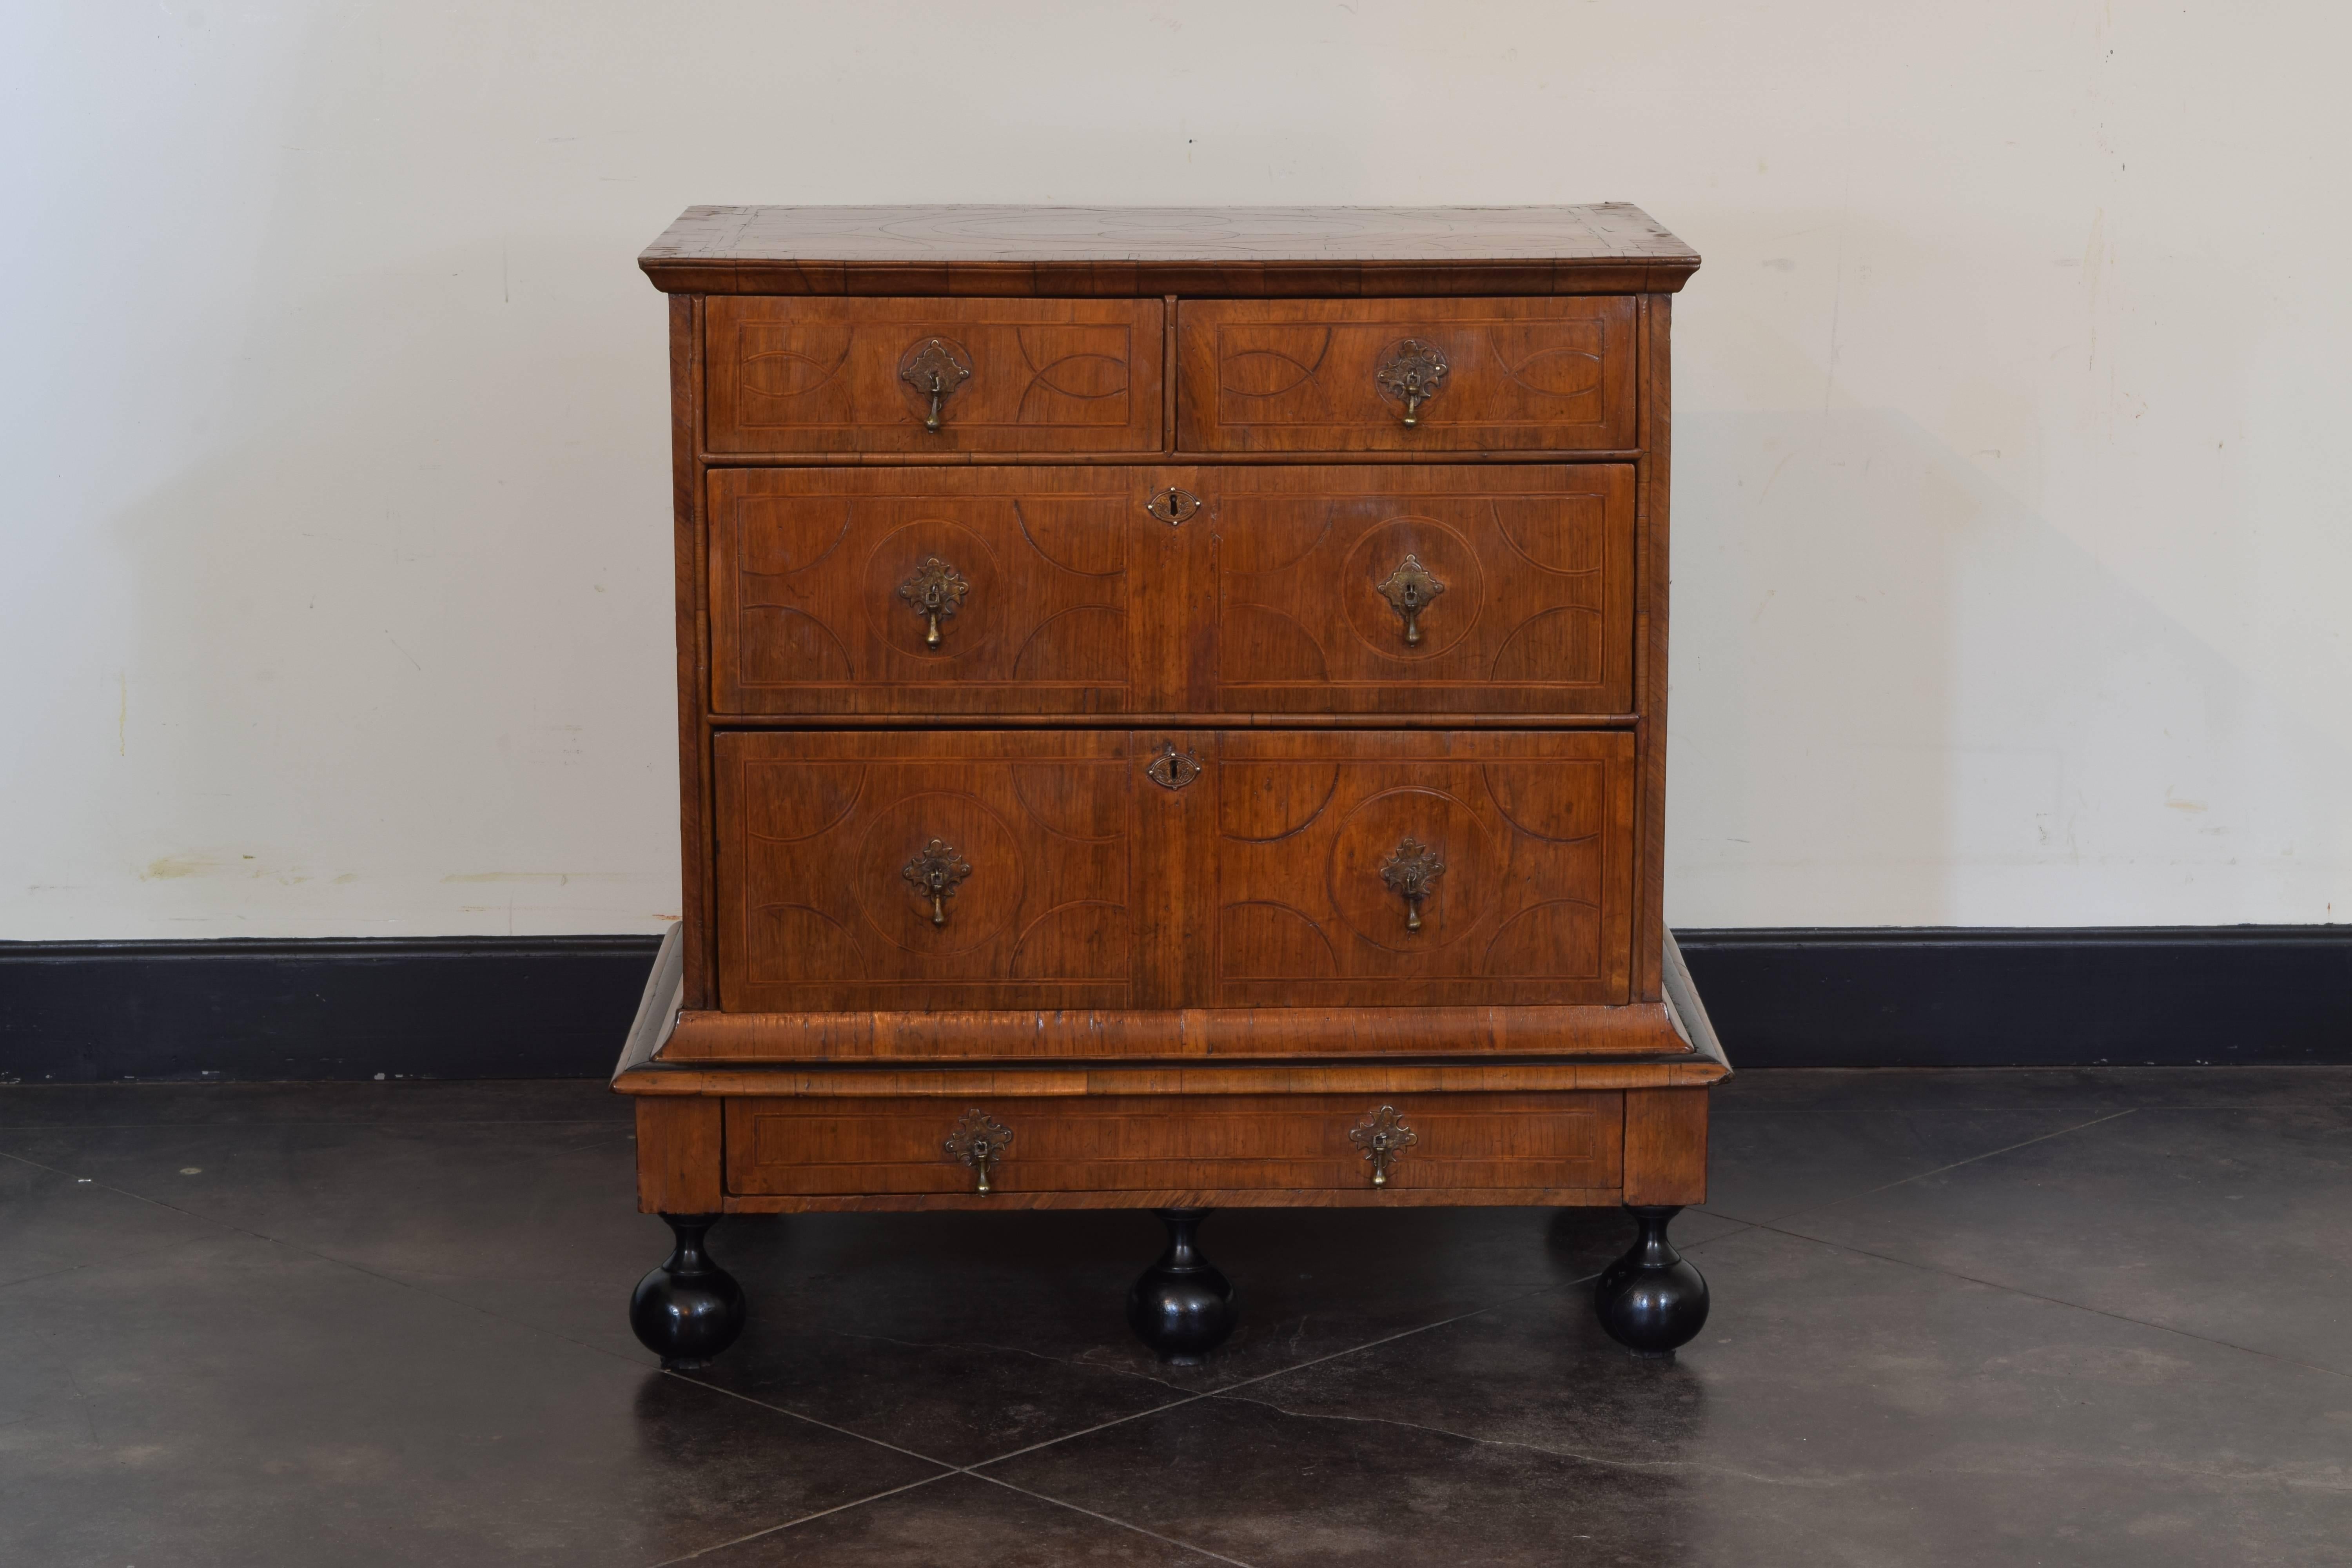 Elaborately veneered with circular and oval bands of inlay, the top with a chamfered edge above a similarly veneered case housing two smaller drawers over two larger drawers, resting on a veneered base housing one drawer and raised on large ebonized